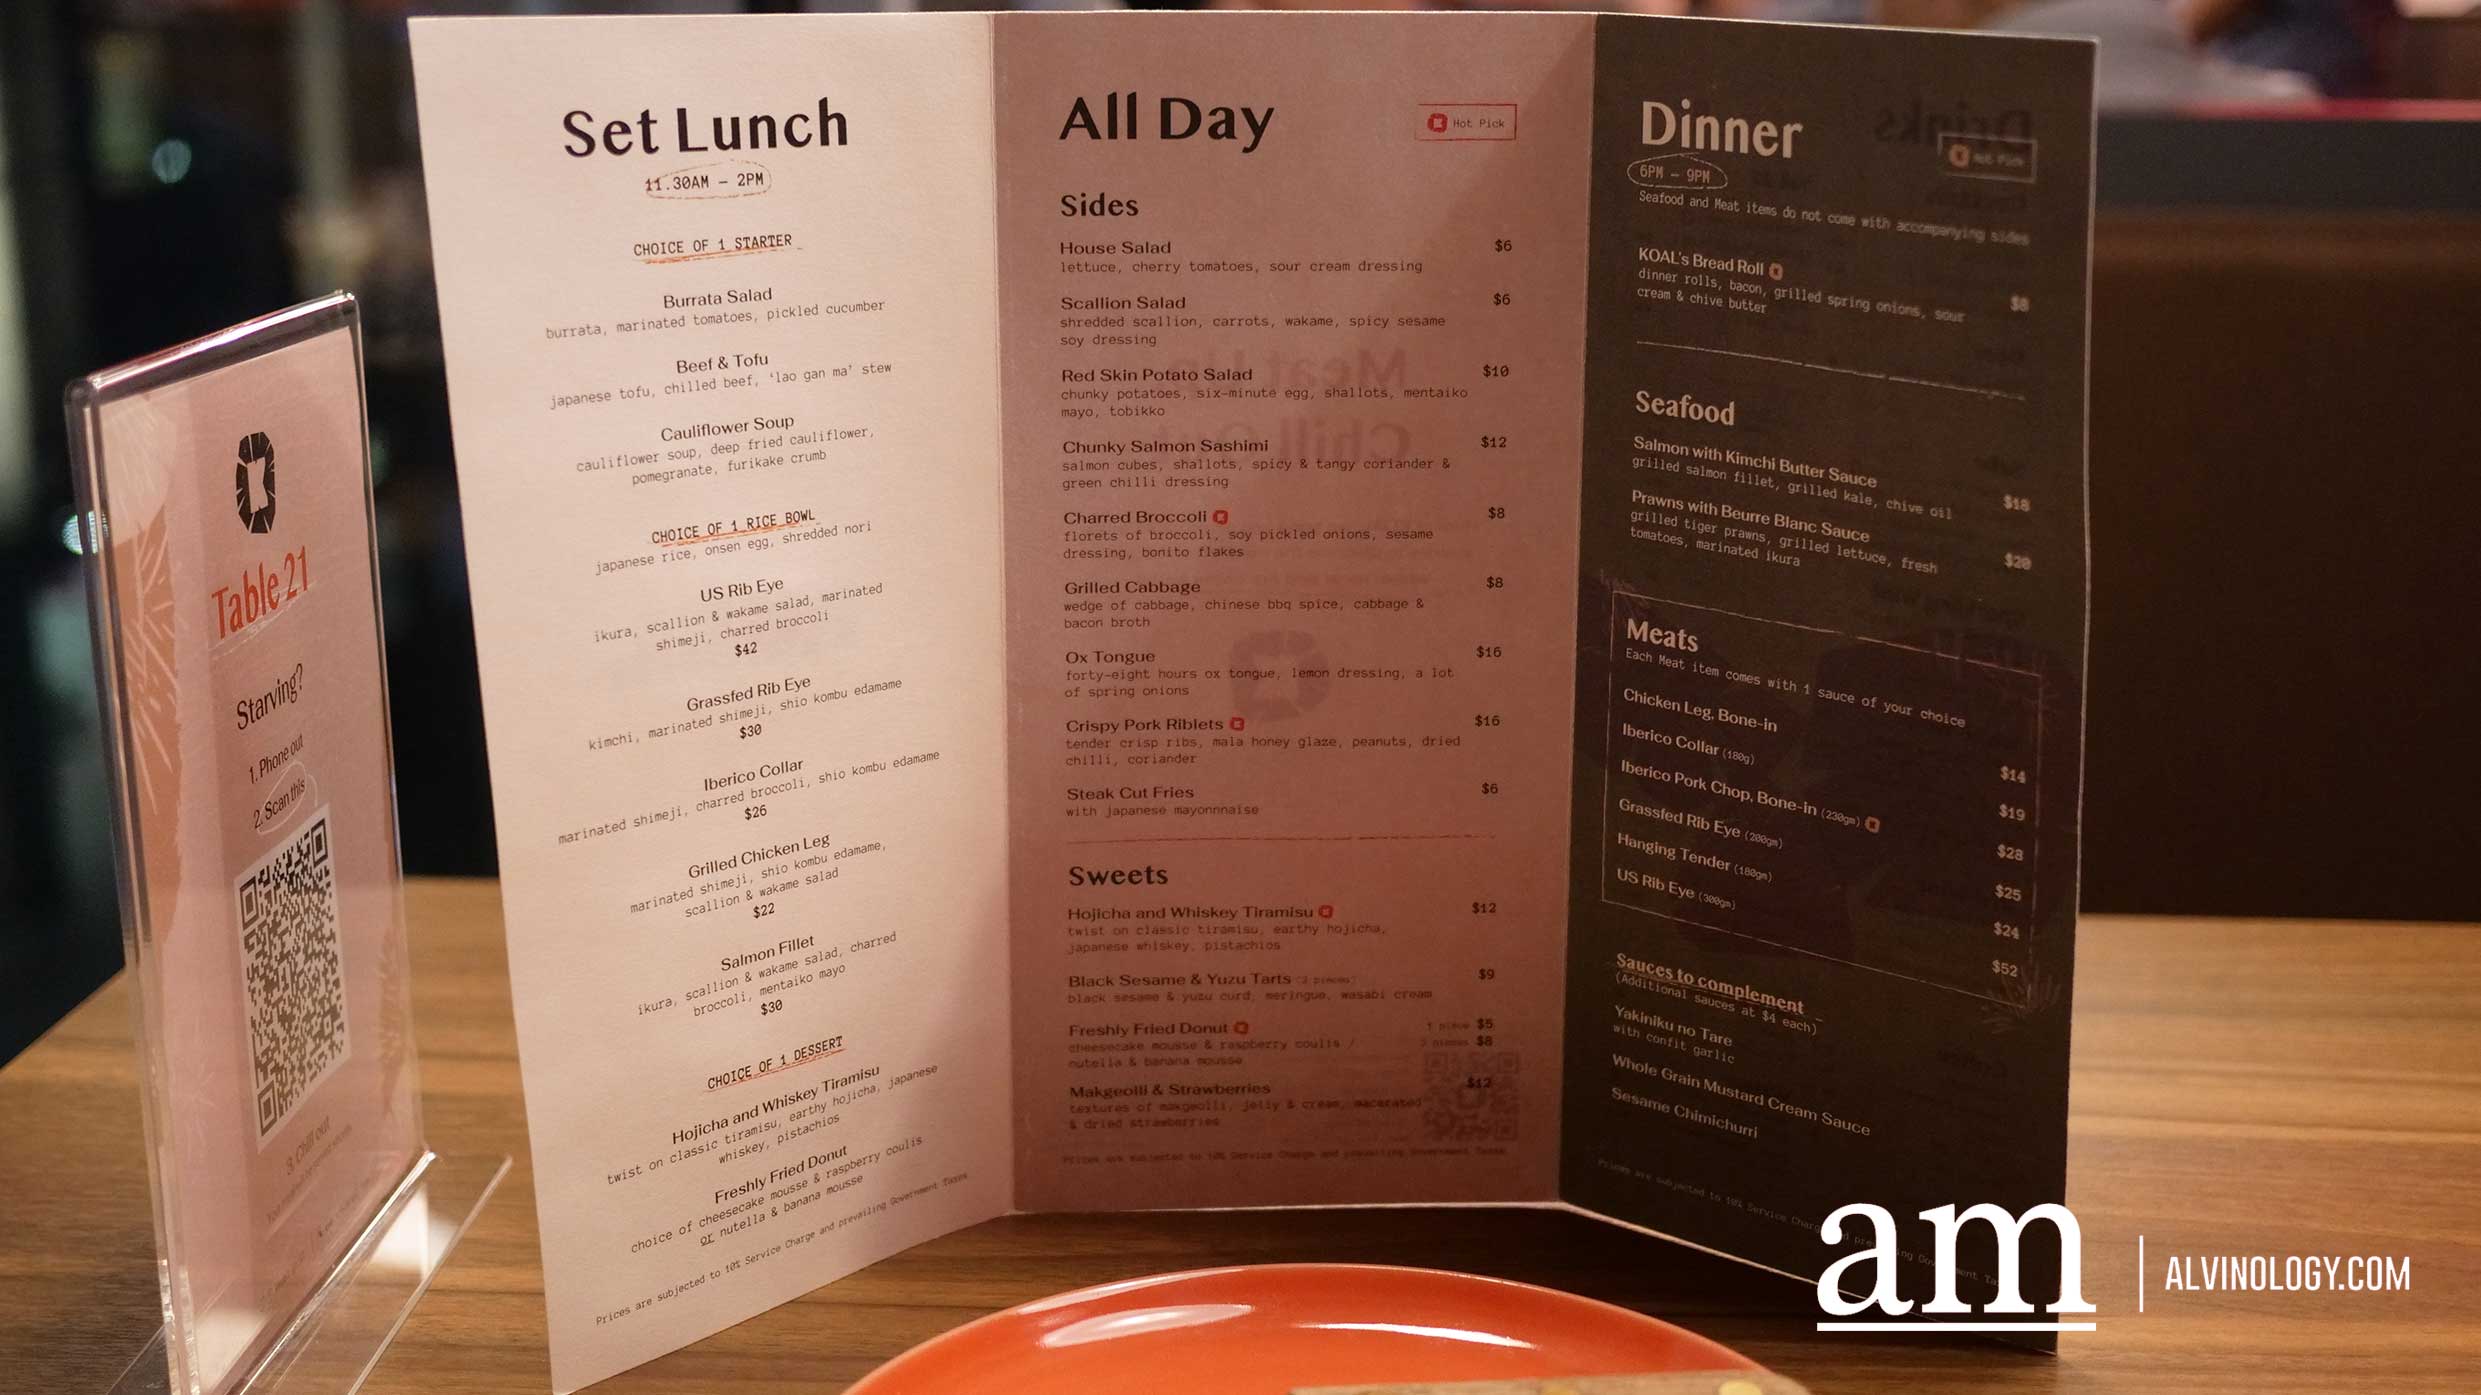 [Review]KOAL Grill by Les Amis Group at Shaw Centre; Lunch Set from $22 - Alvinology